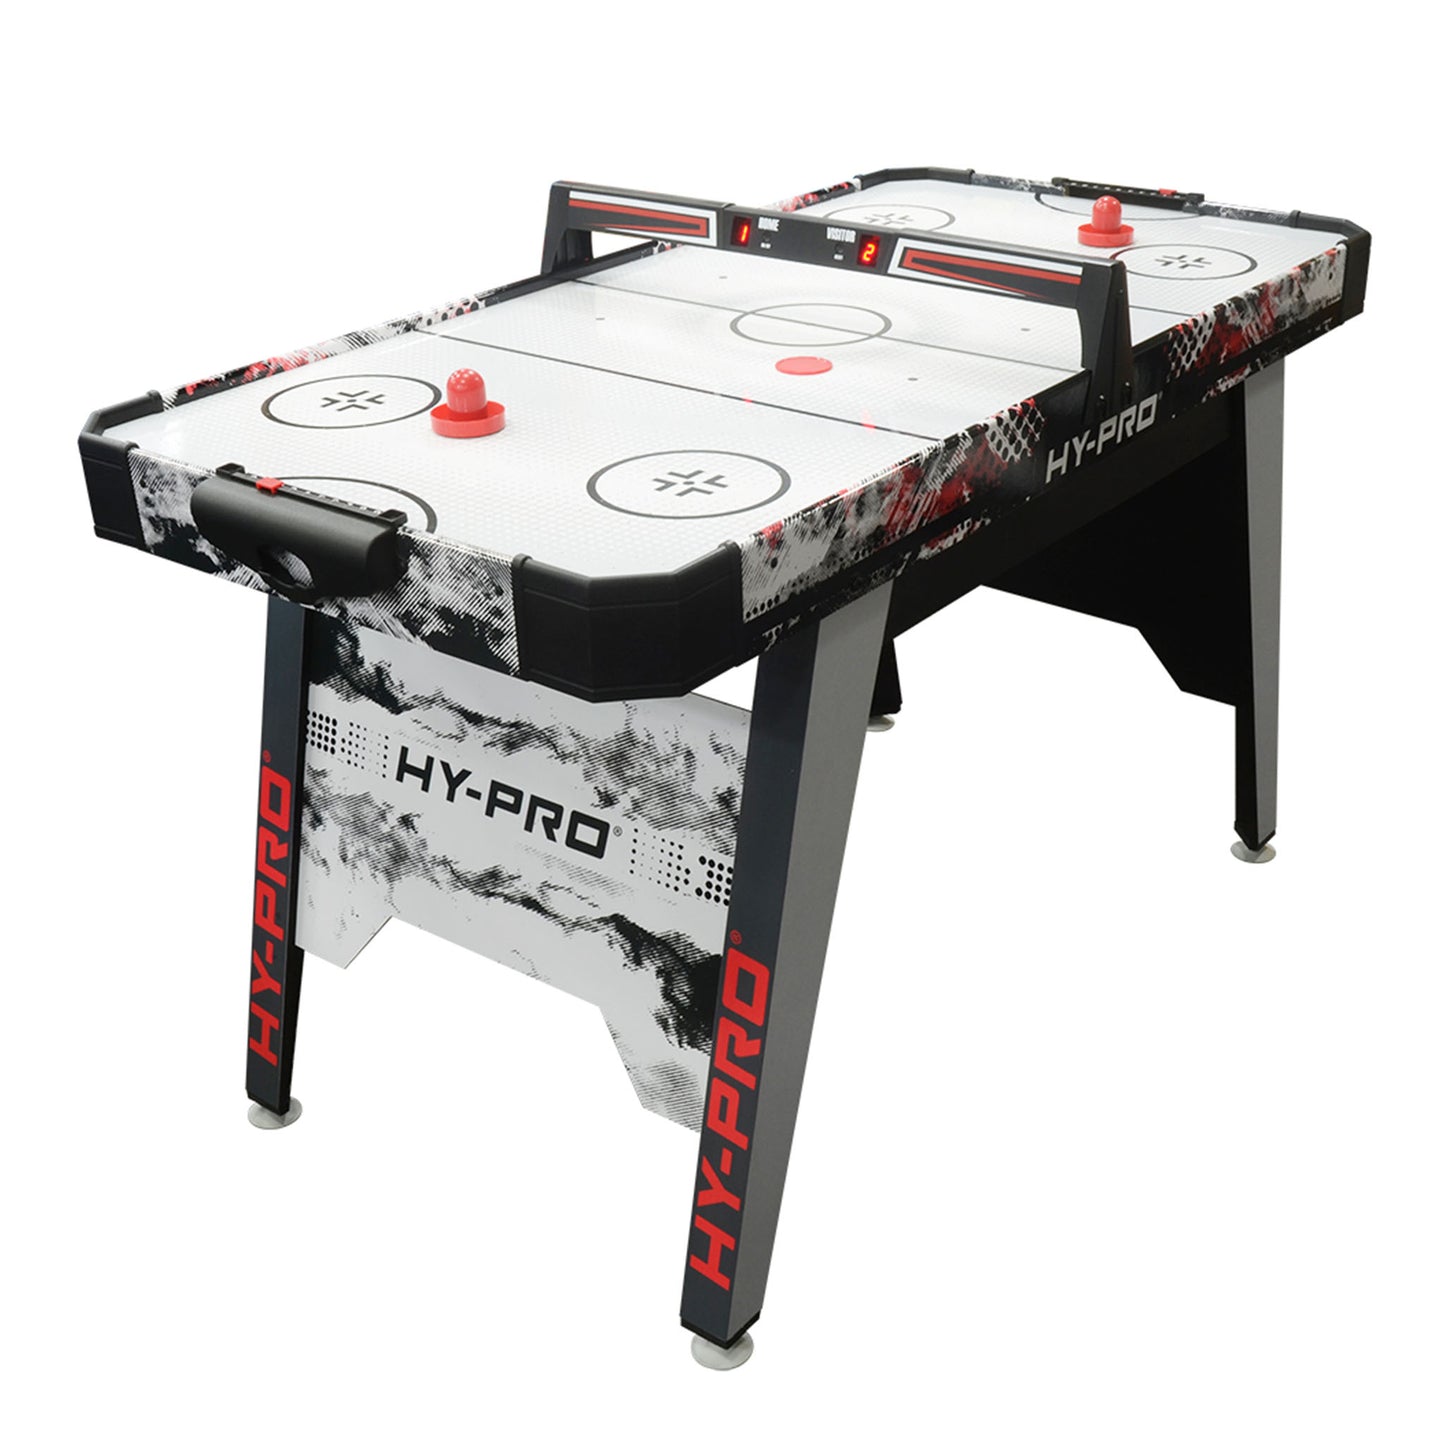 Hy-Pro 4ft 6in Air Hockey Table with LED Score Bar